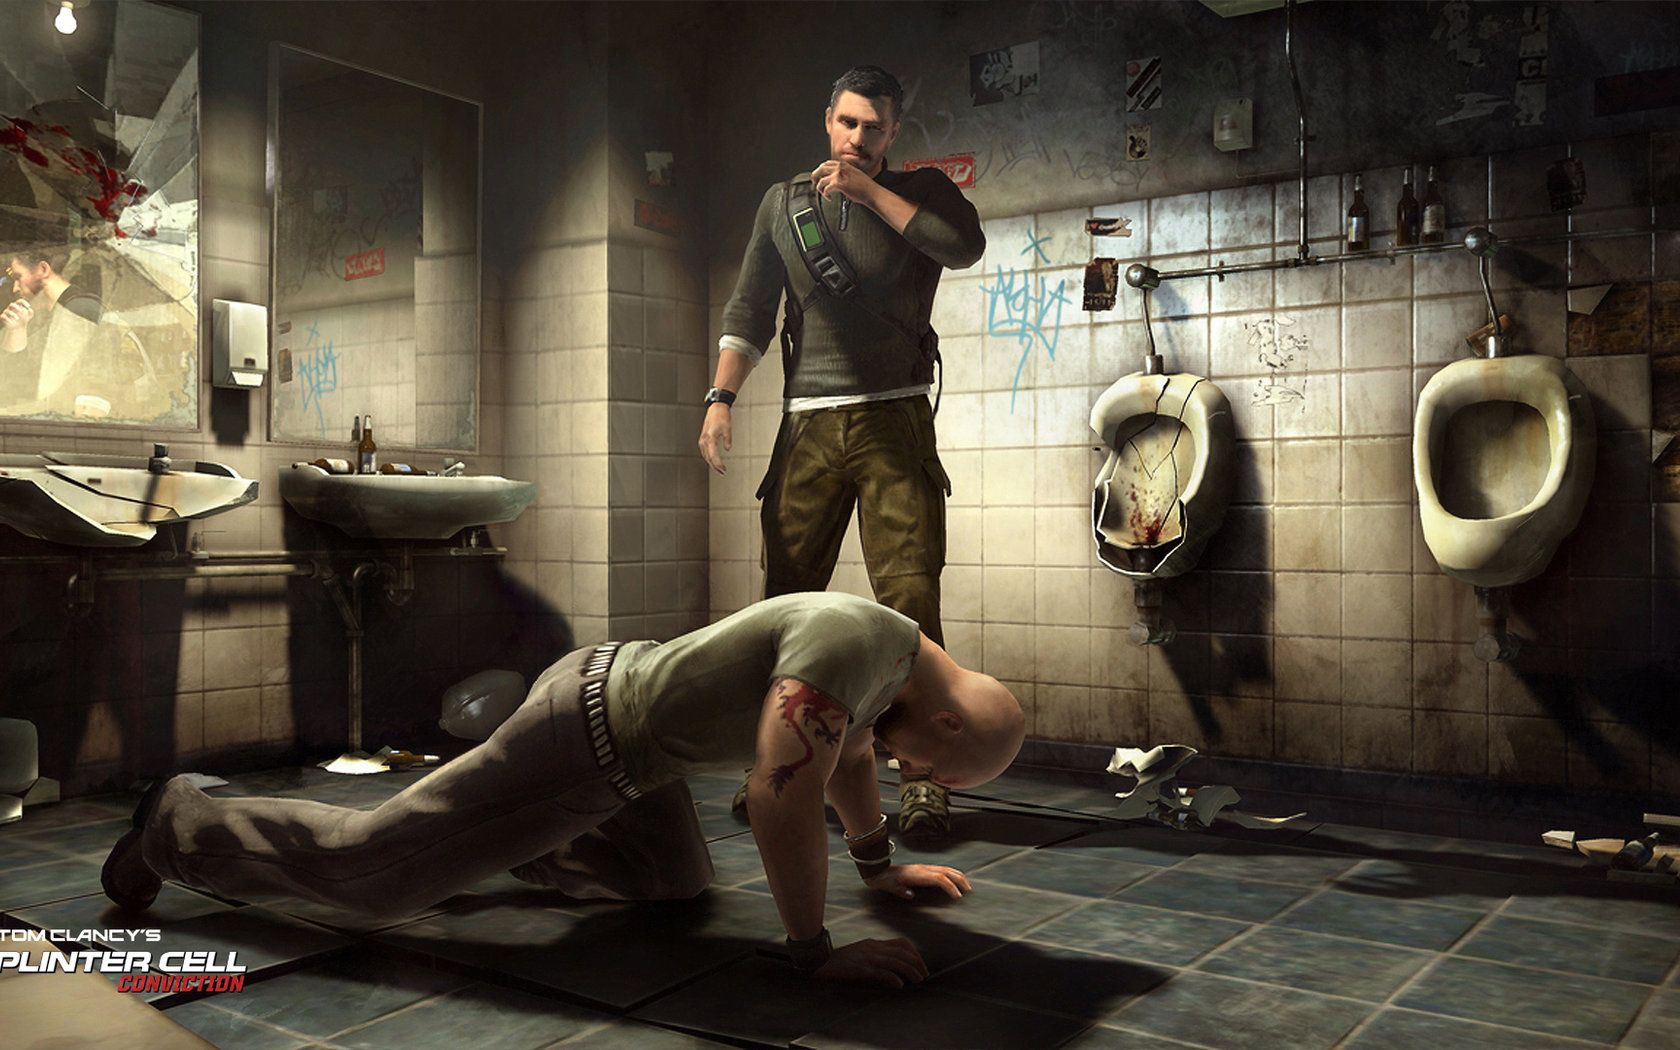 Splinter Cell Conviction 2010 wallpapers and images - wallpapers